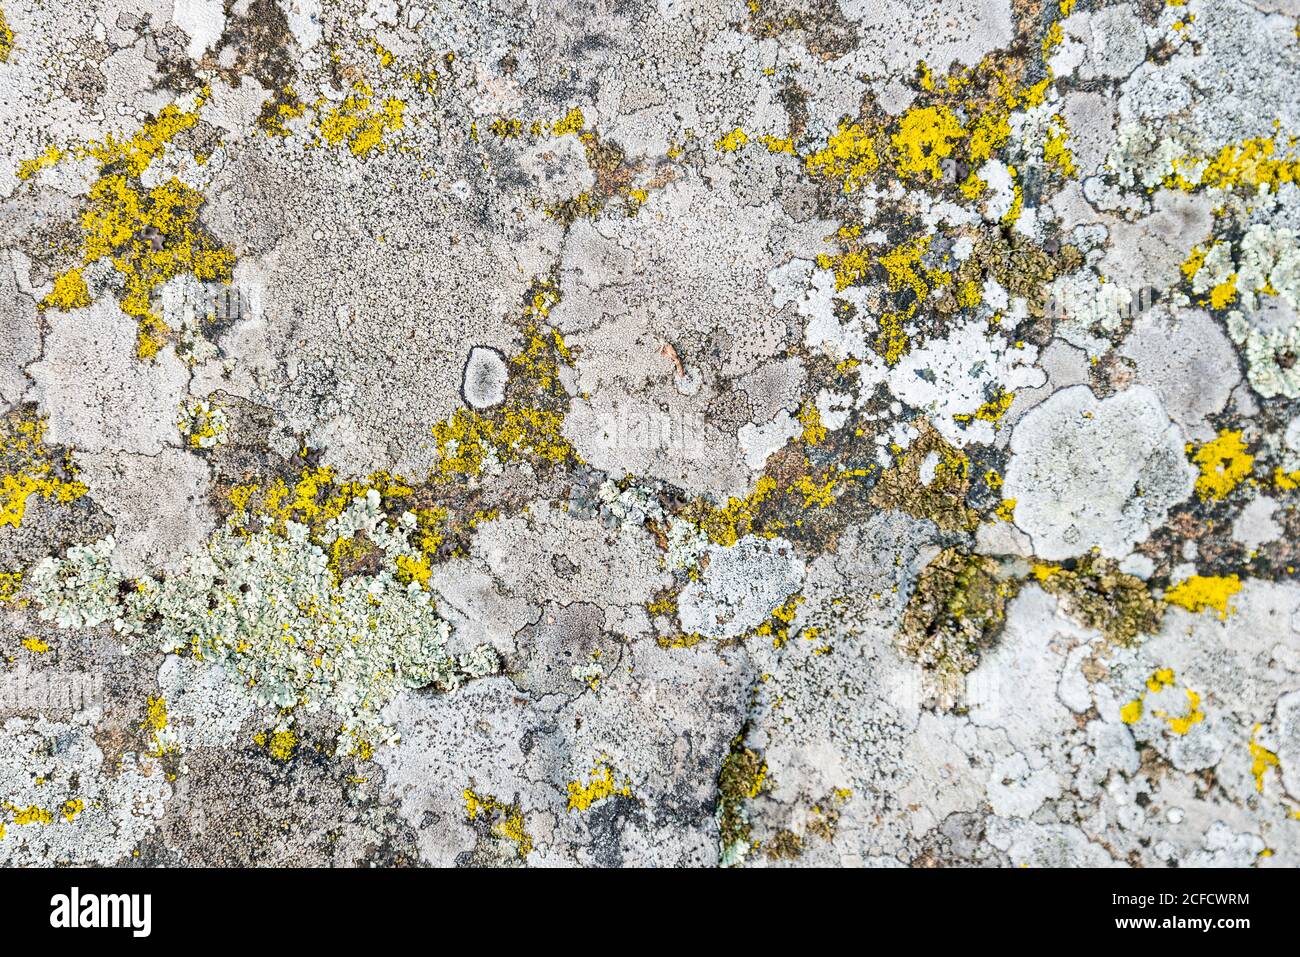 Mosses and lichens on stone, Smaland, Sweden Stock Photo